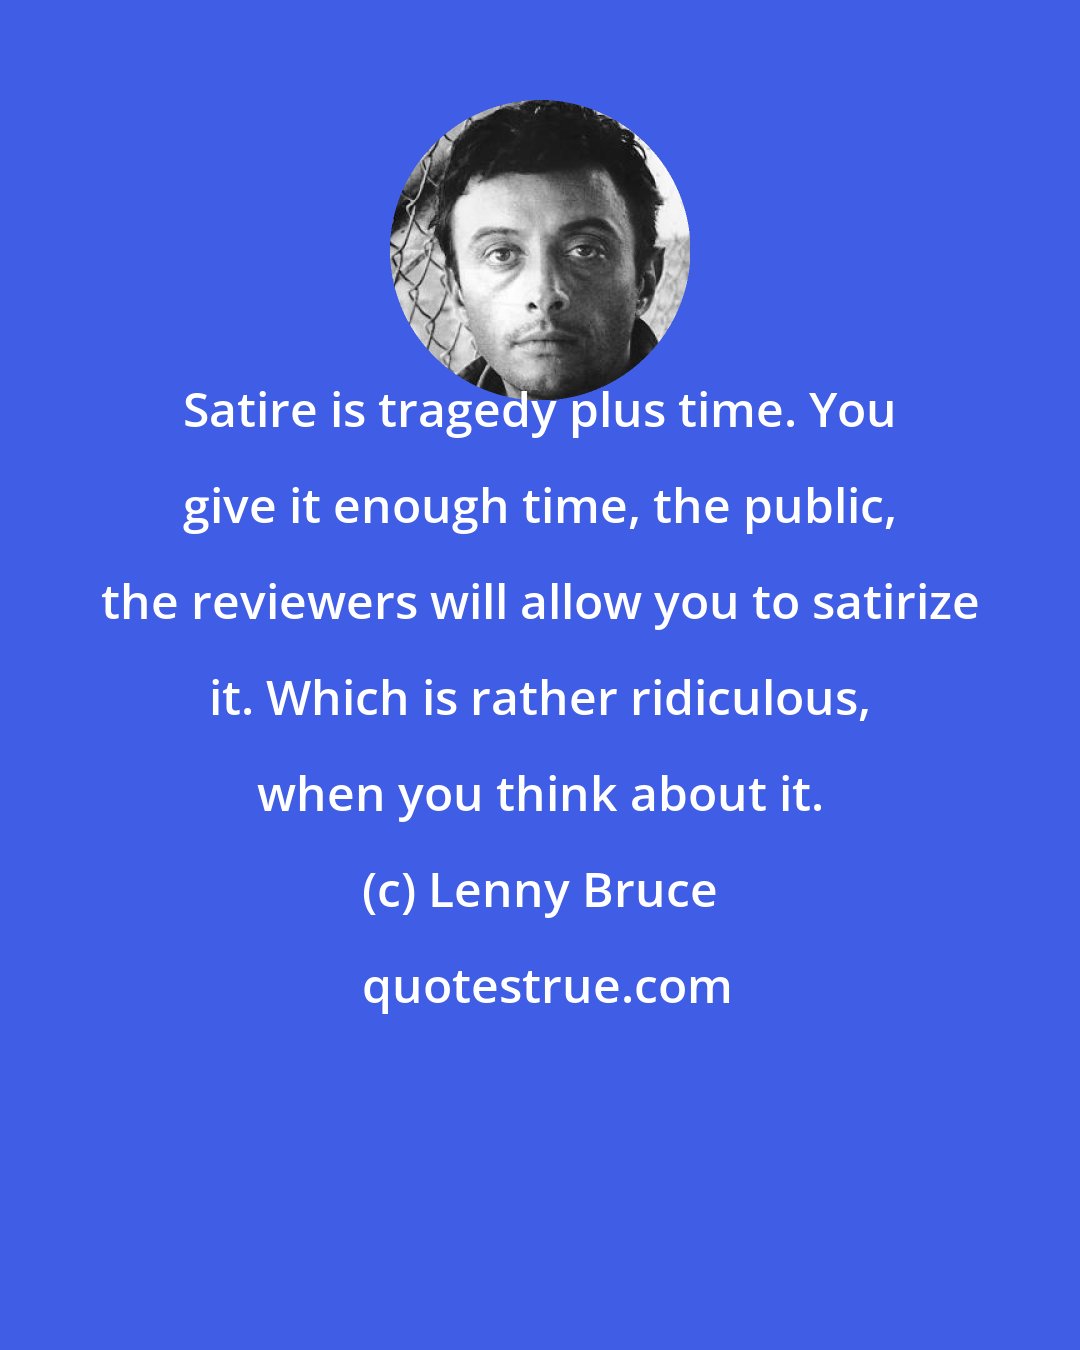 Lenny Bruce: Satire is tragedy plus time. You give it enough time, the public, the reviewers will allow you to satirize it. Which is rather ridiculous, when you think about it.